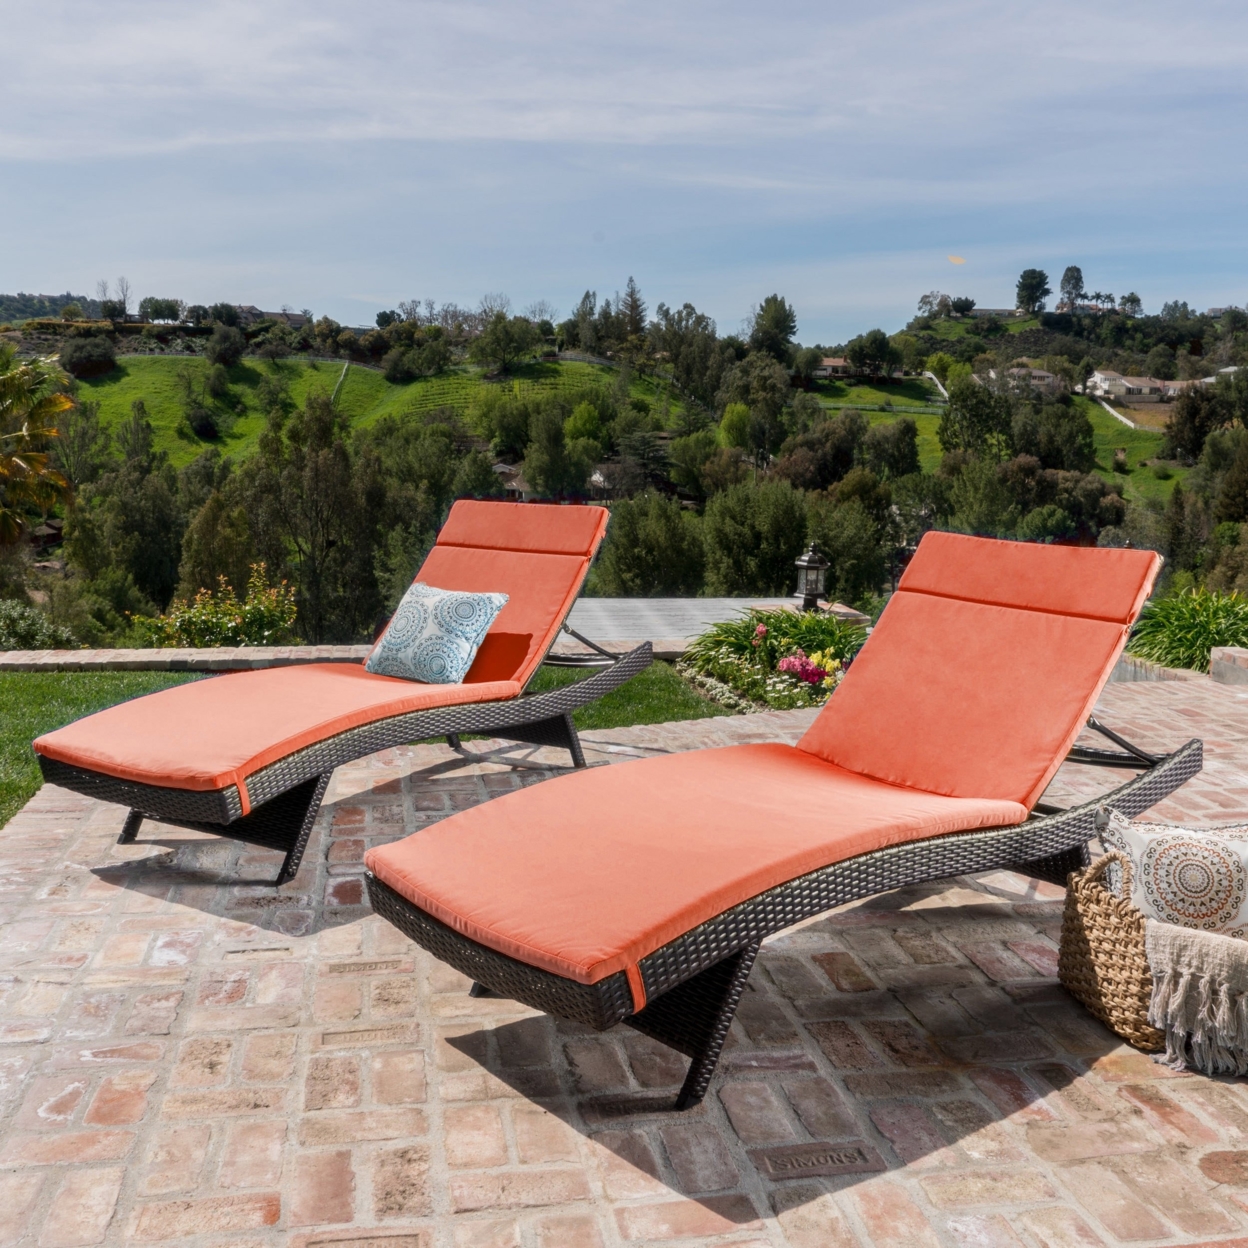 Savana Outdoor Wicker Lounge With Water Resistant Cushion - Multibrown/orange, Qty Of 2